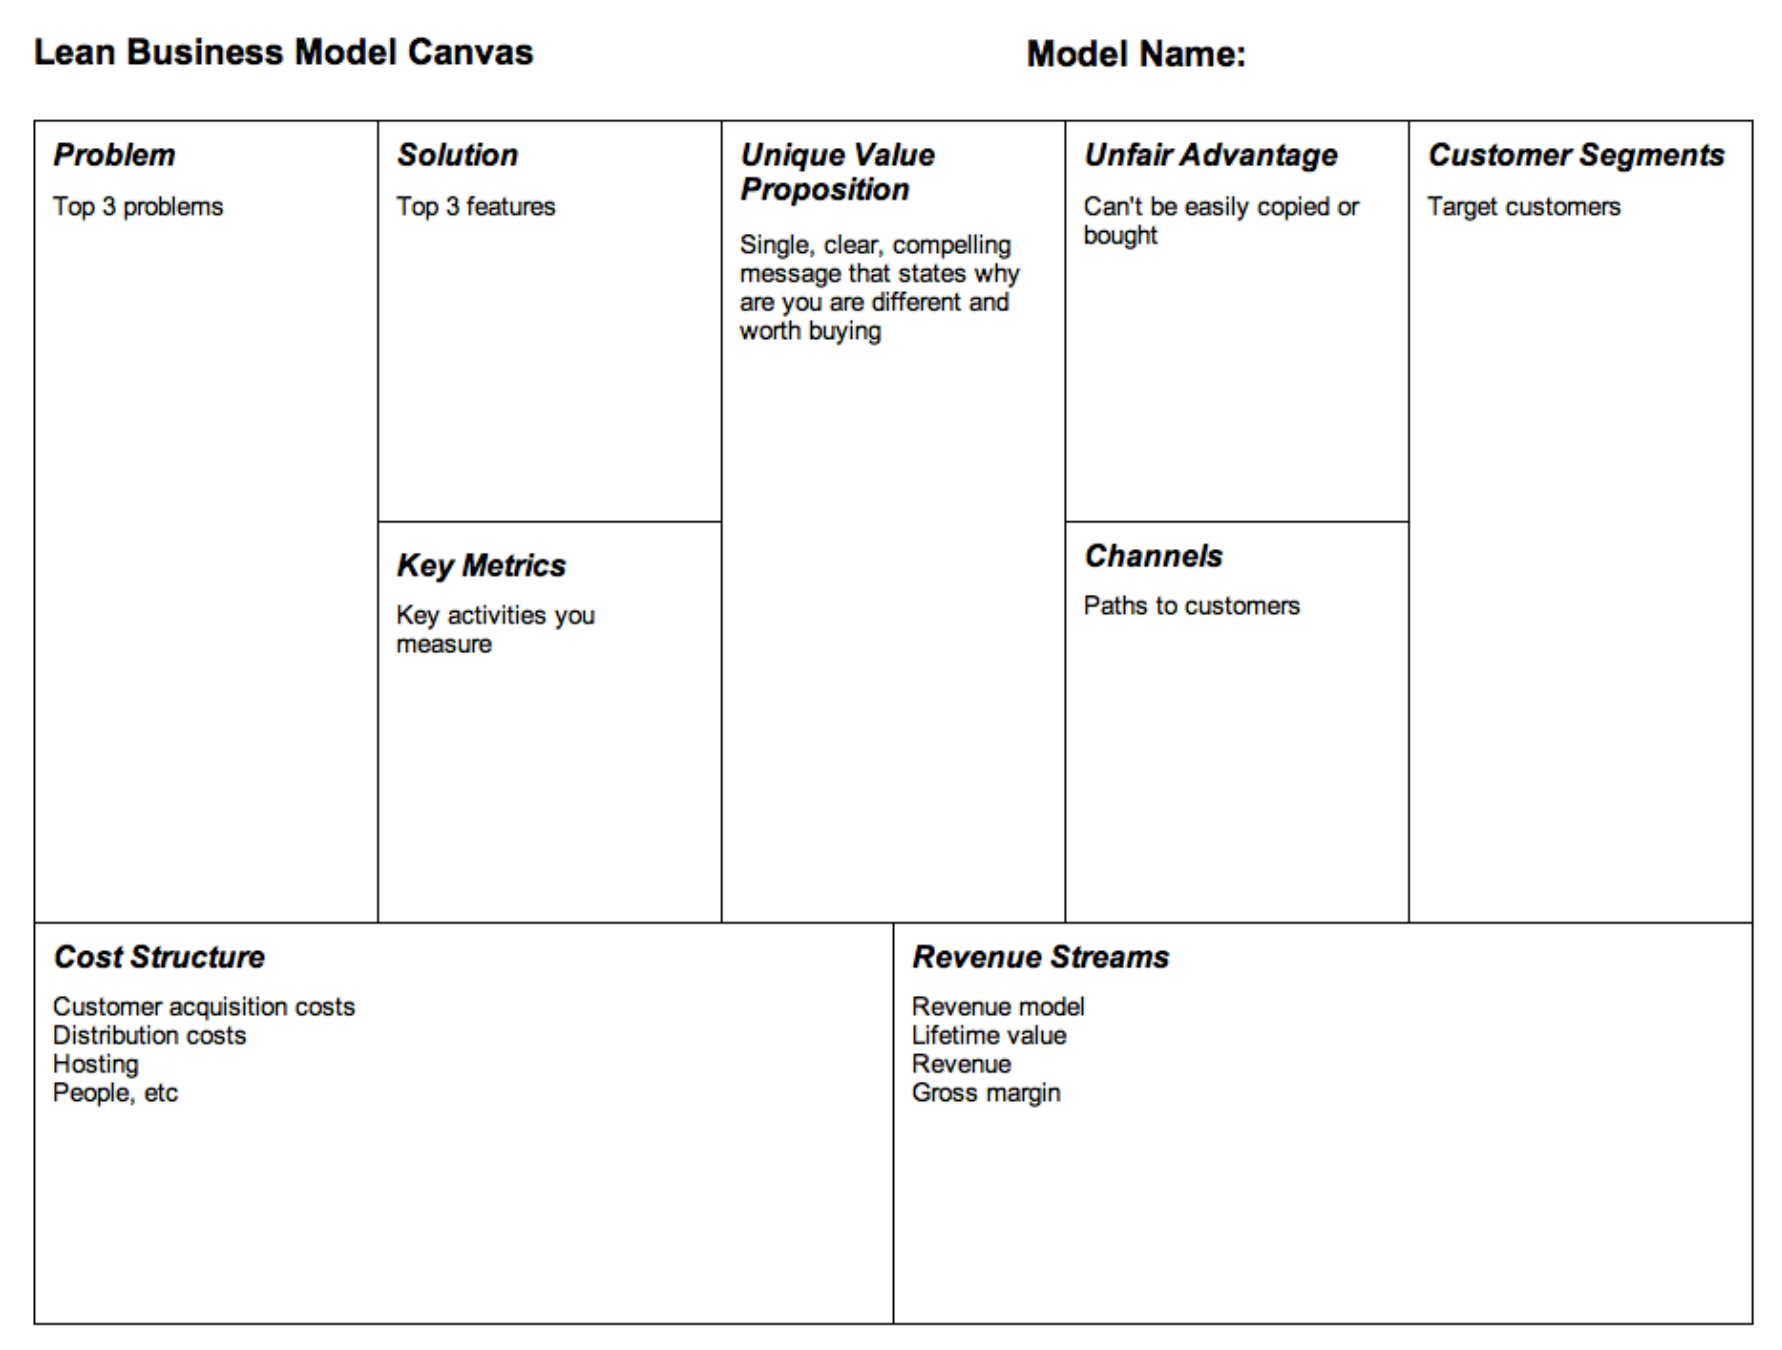 Lean Business Model Canvas | Pdf | Startup Business Plan With Business Canvas Word Template